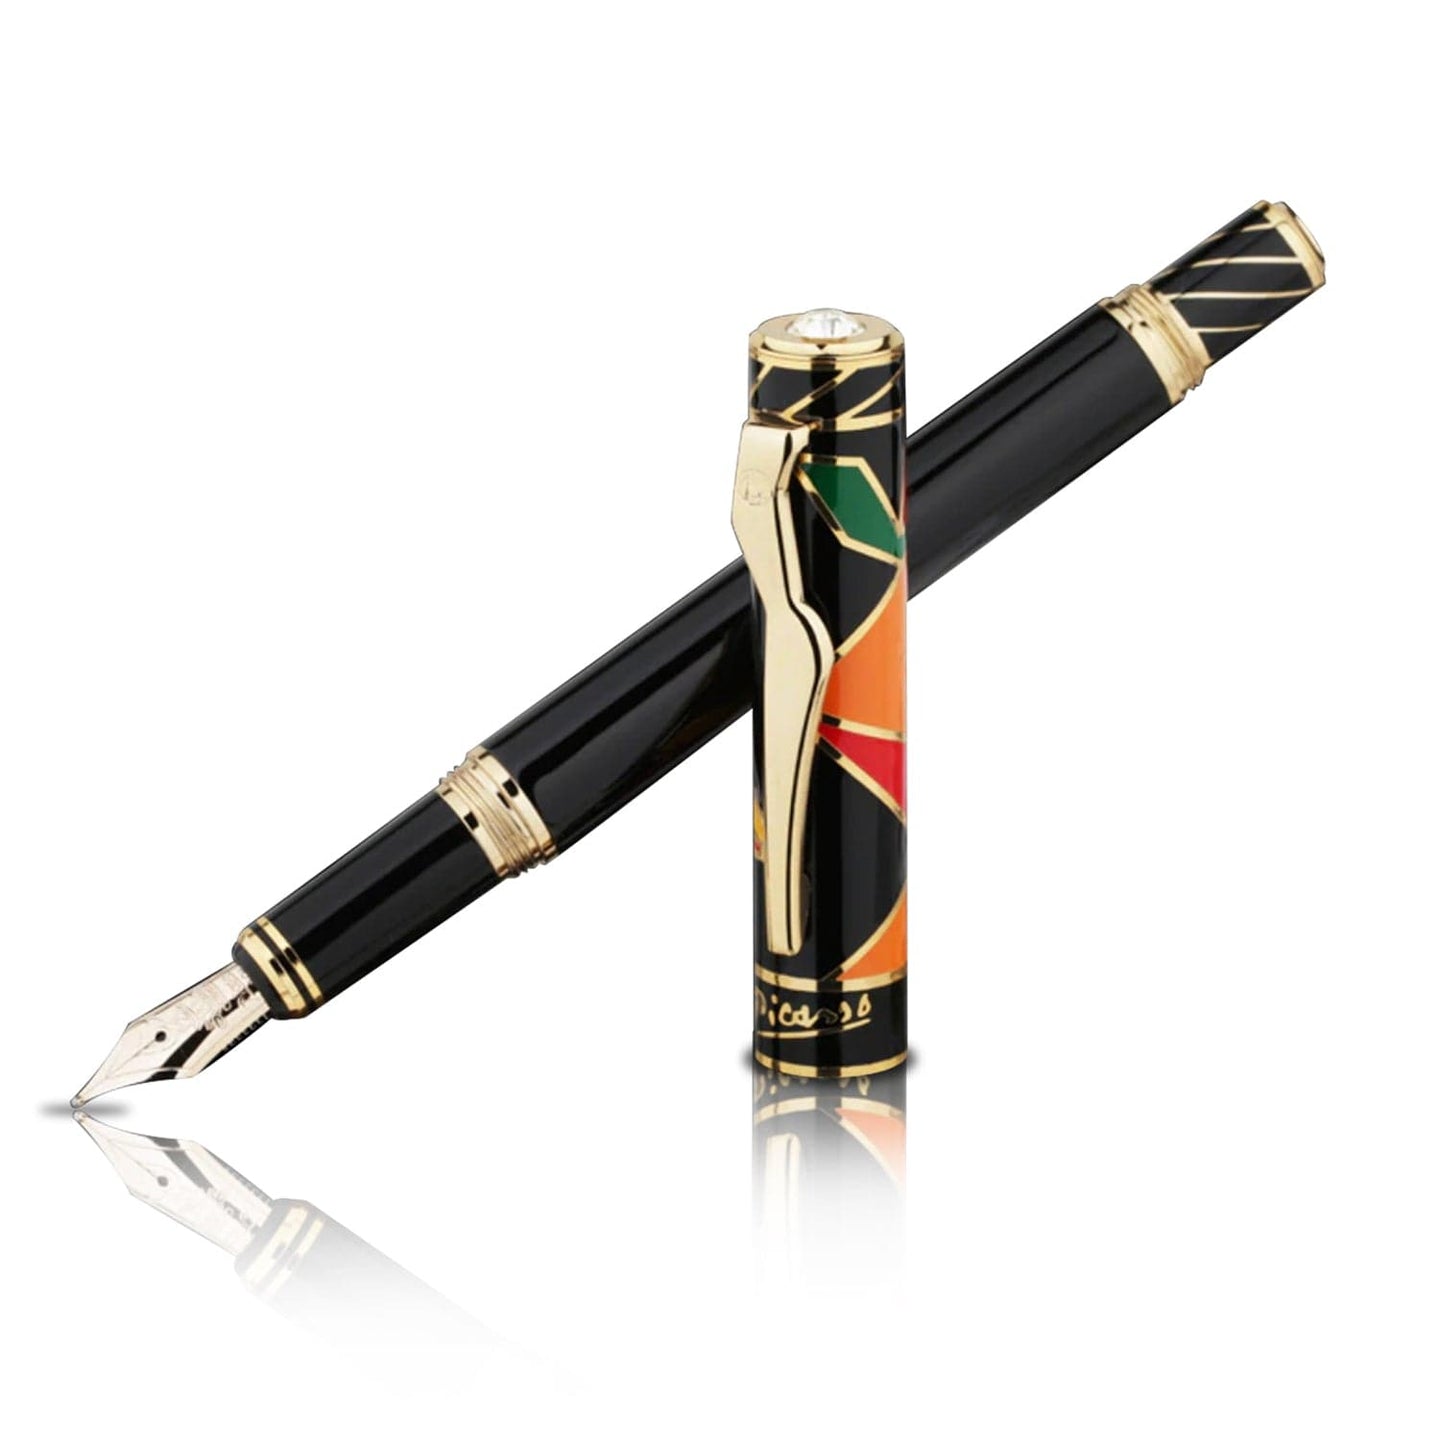 The Picasso 10K Gold-Plated Fountain Pen | Classic Writing Instrument With Elegant Fine-Art Artwork-Inspired Design | Perfect for Home Work Or School | Ideal For Students Business People Artists & More.